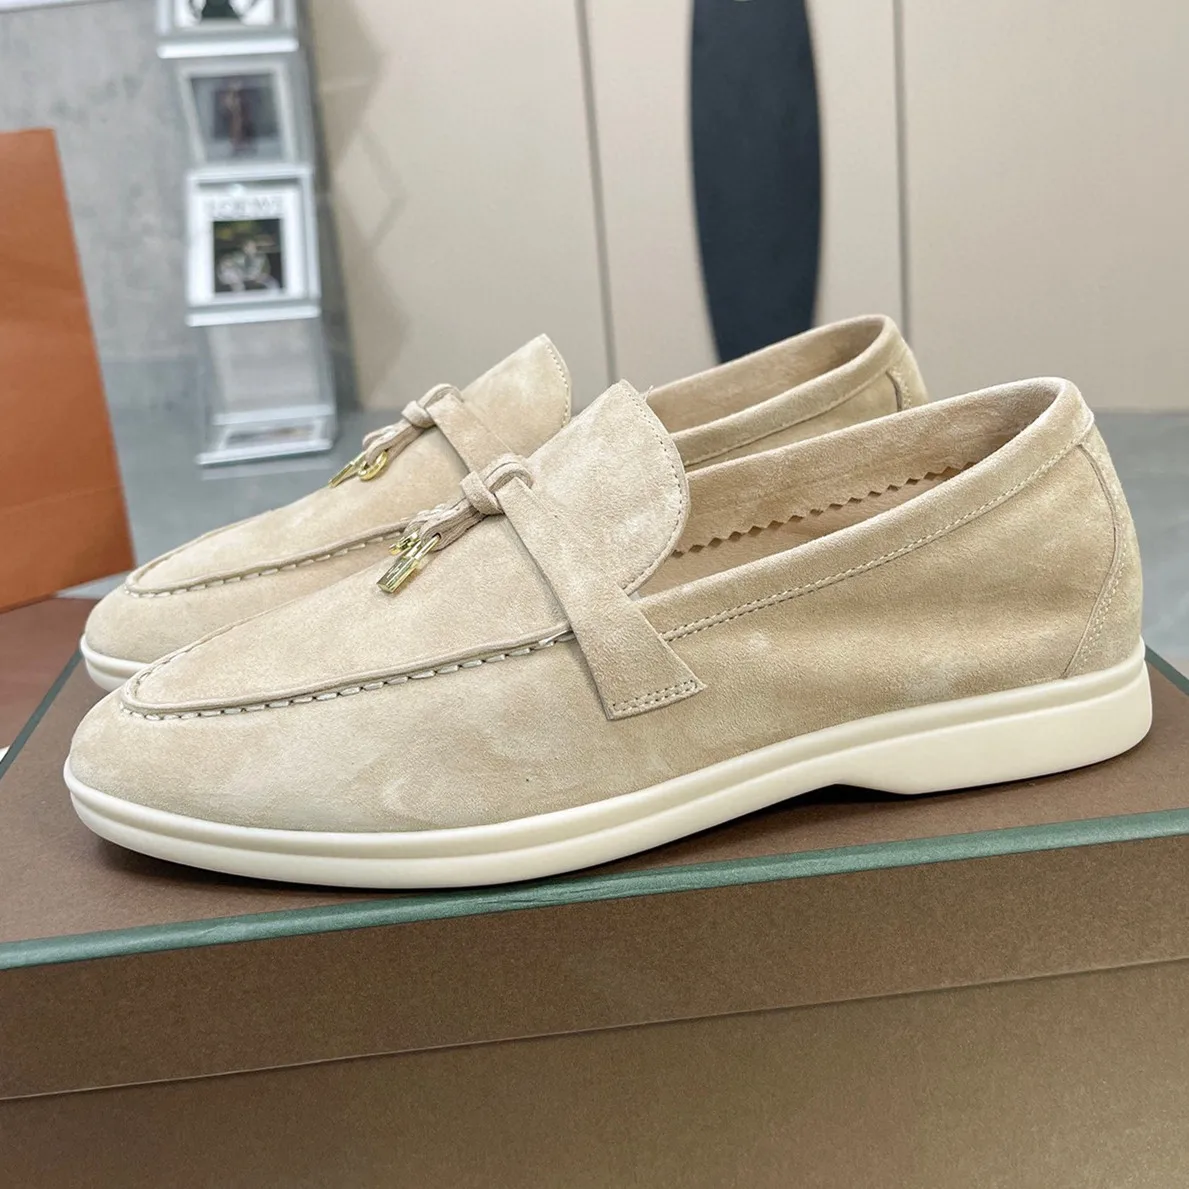 Summer strolling leather casual shoes, male cattle suede lovers' flat sole Lefu shoes, spring and autumn new women's shoes